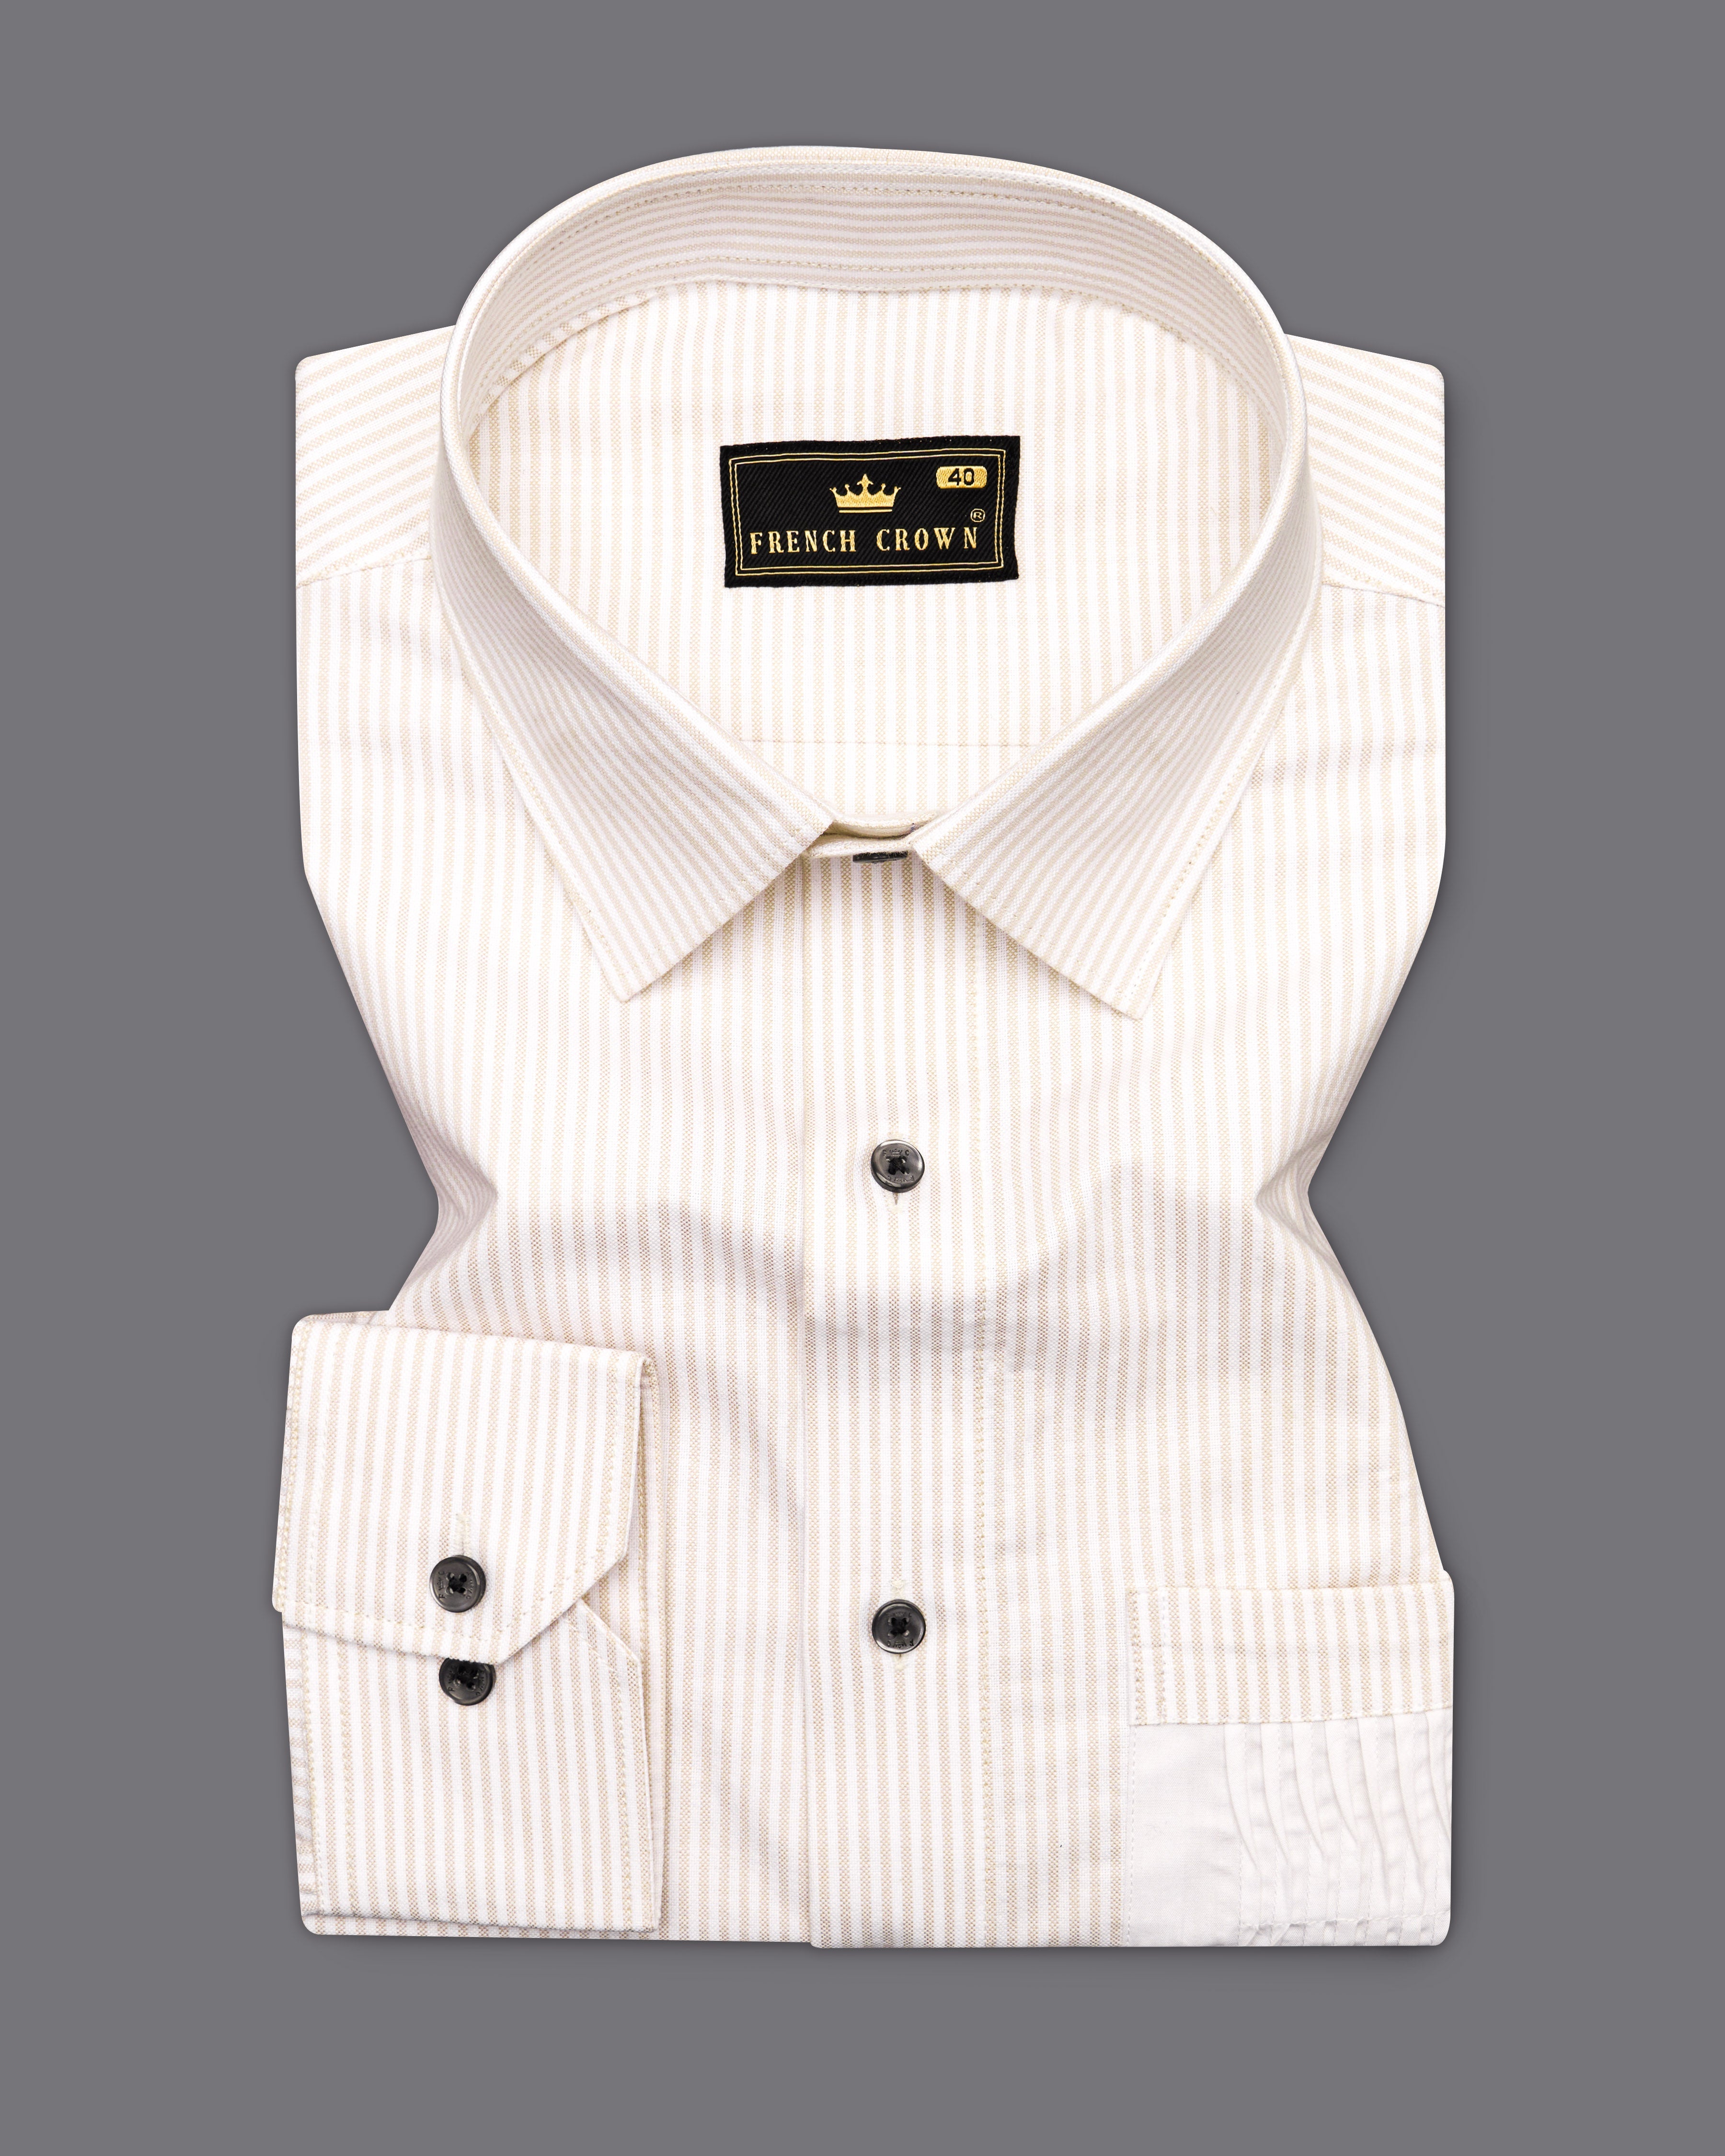 Old Lace Cream and White Pin Striped Royal Oxford Designer Shirt 9748-BLK-P372-38, 9748-BLK-P372-H-38, 9748-BLK-P372-39, 9748-BLK-P372-H-39, 9748-BLK-P372-40, 9748-BLK-P372-H-40, 9748-BLK-P372-42, 9748-BLK-P372-H-42, 9748-BLK-P372-44, 9748-BLK-P372-H-44, 9748-BLK-P372-46, 9748-BLK-P372-H-46, 9748-BLK-P372-48, 9748-BLK-P372-H-48, 9748-BLK-P372-50, 9748-BLK-P372-H-50, 9748-BLK-P372-52, 9748-BLK-P372-H-52